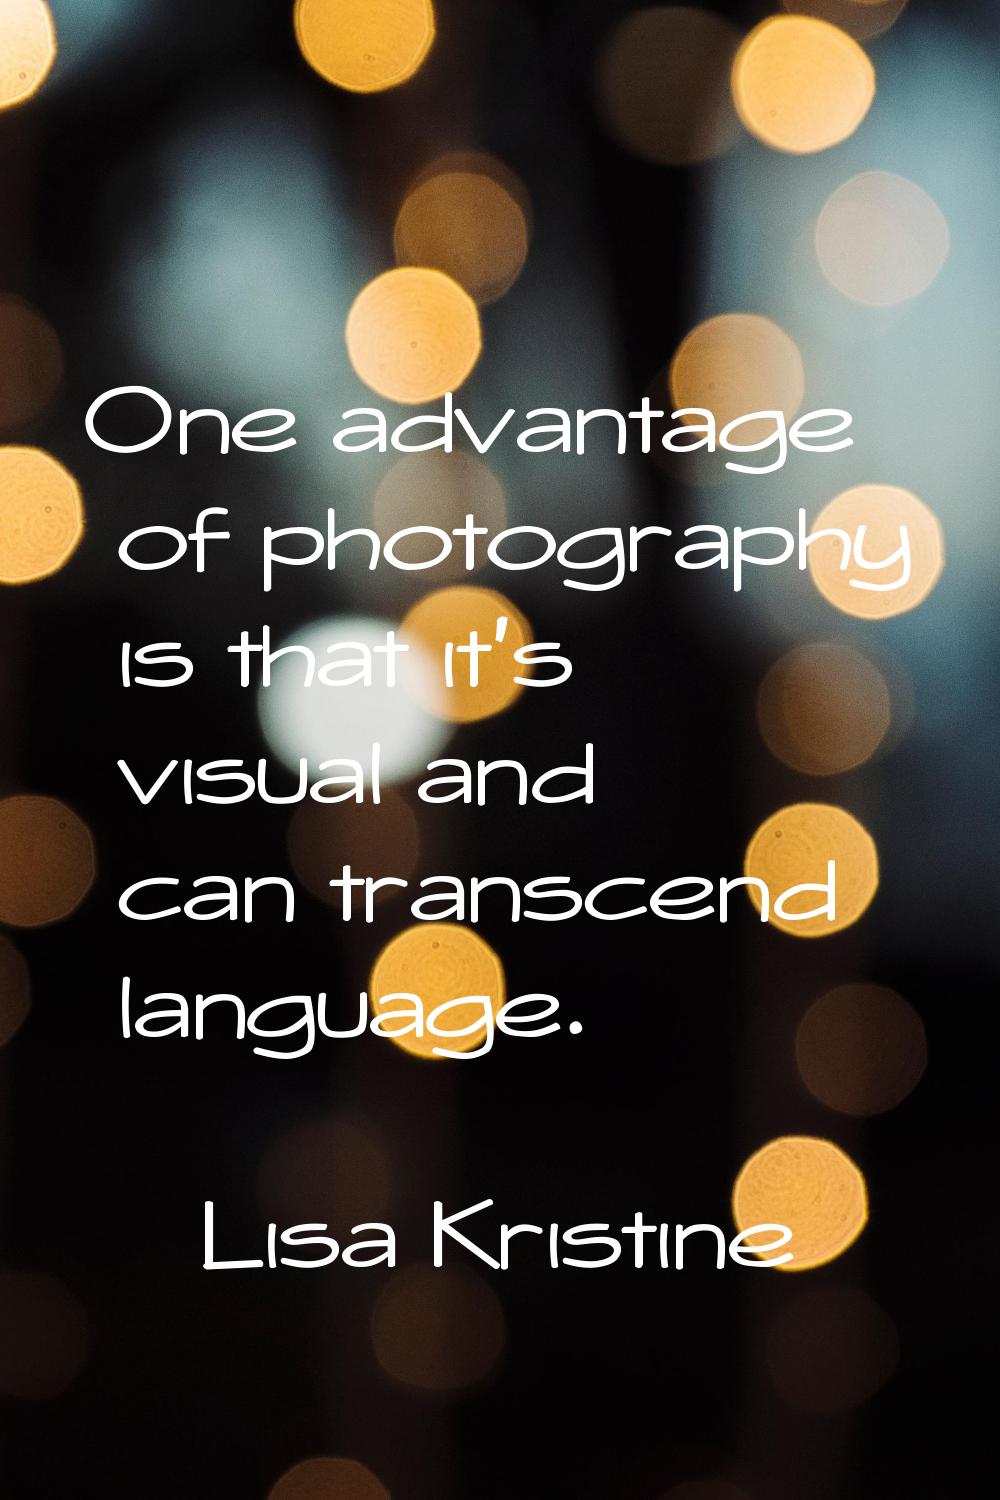 One advantage of photography is that it's visual and can transcend language.